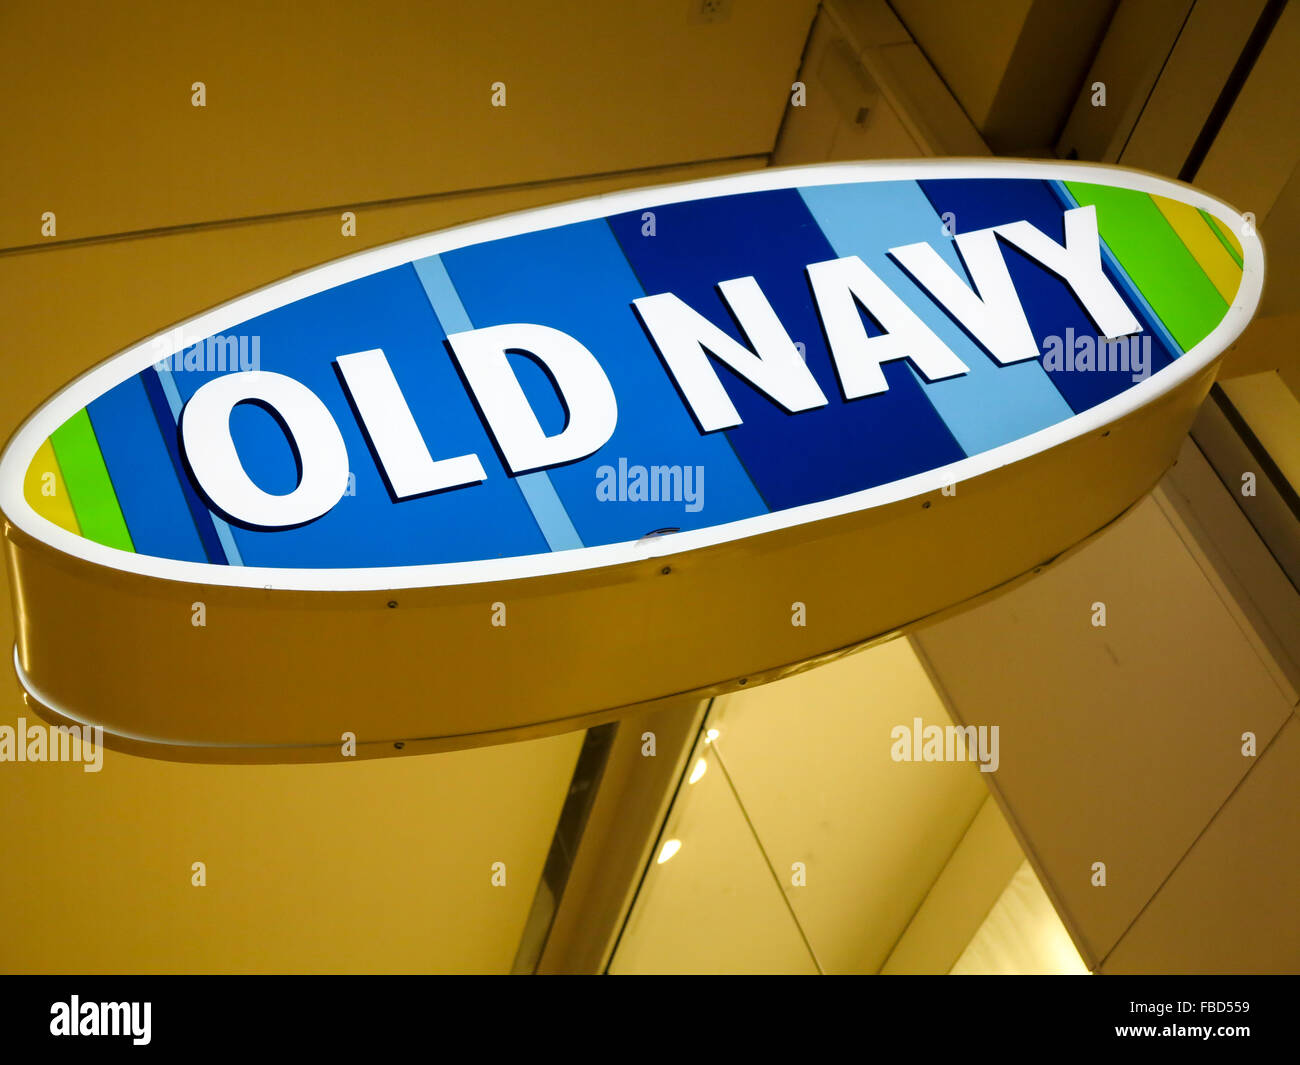 Old Navy clothing store in Alberta, Canada. Stock Photo